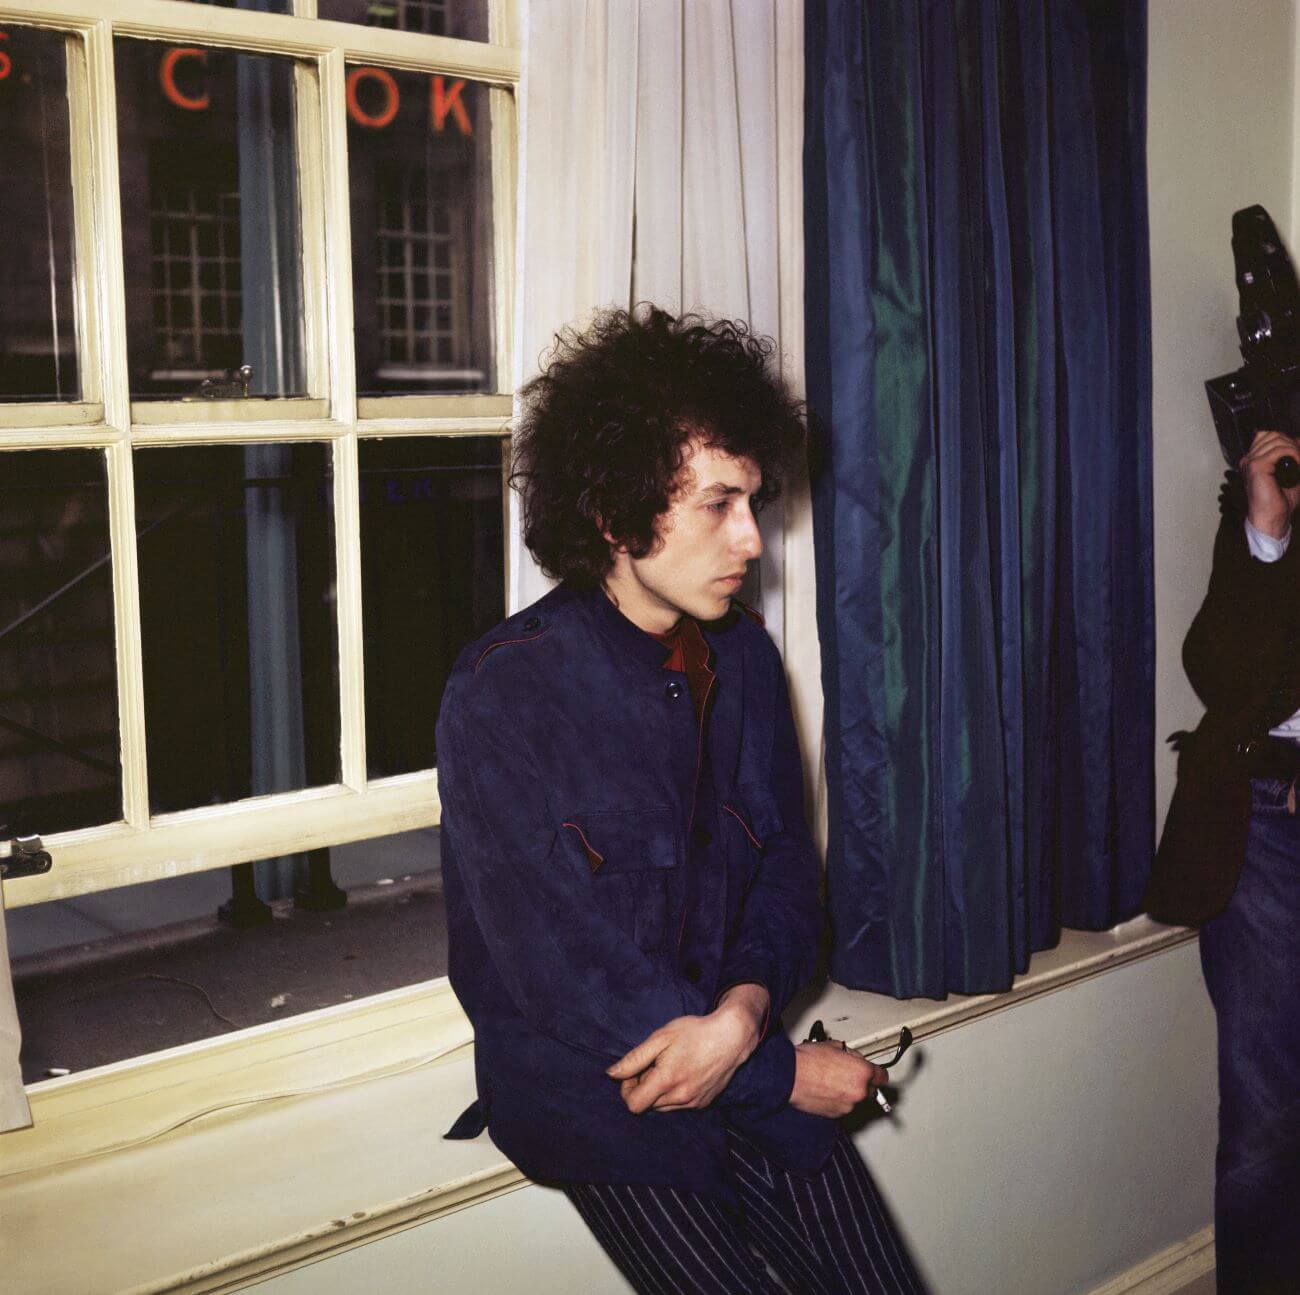 Bob Dylan leans against a window ledge and holds a cigarette.